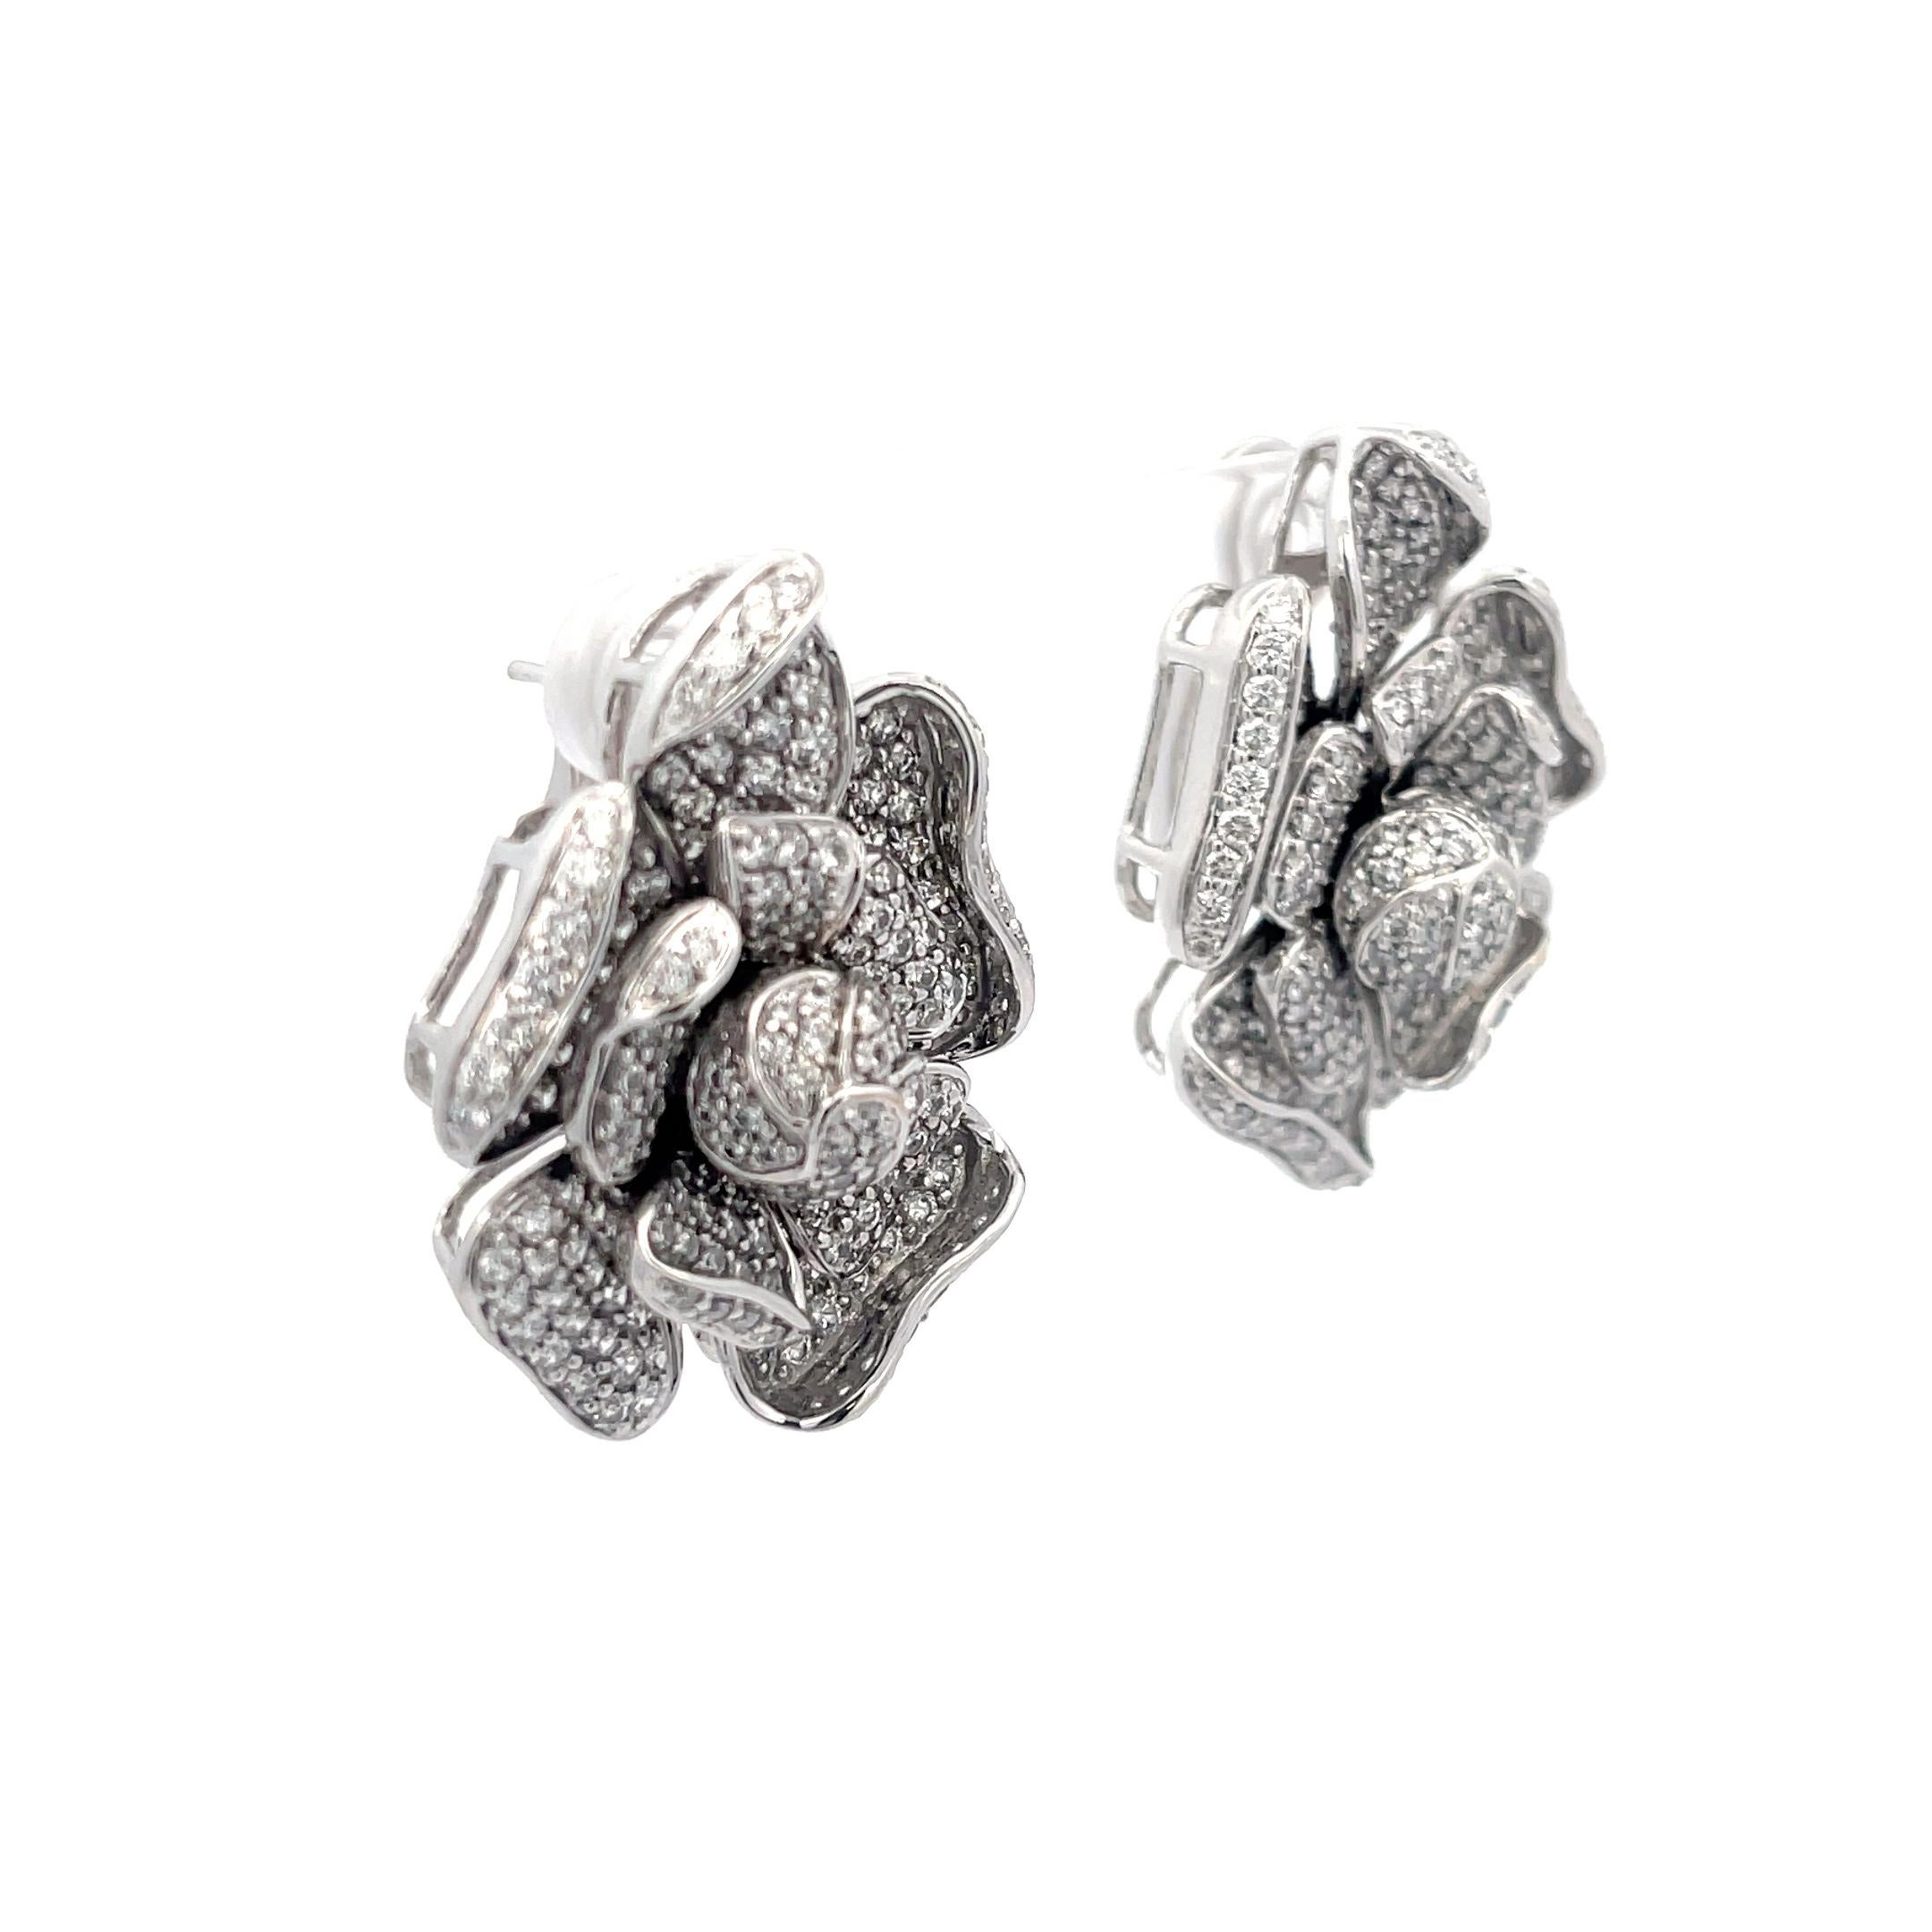 Diamond '3.75ctw' Flower Earrings 18k White Gold In Excellent Condition For Sale In Dallas, TX